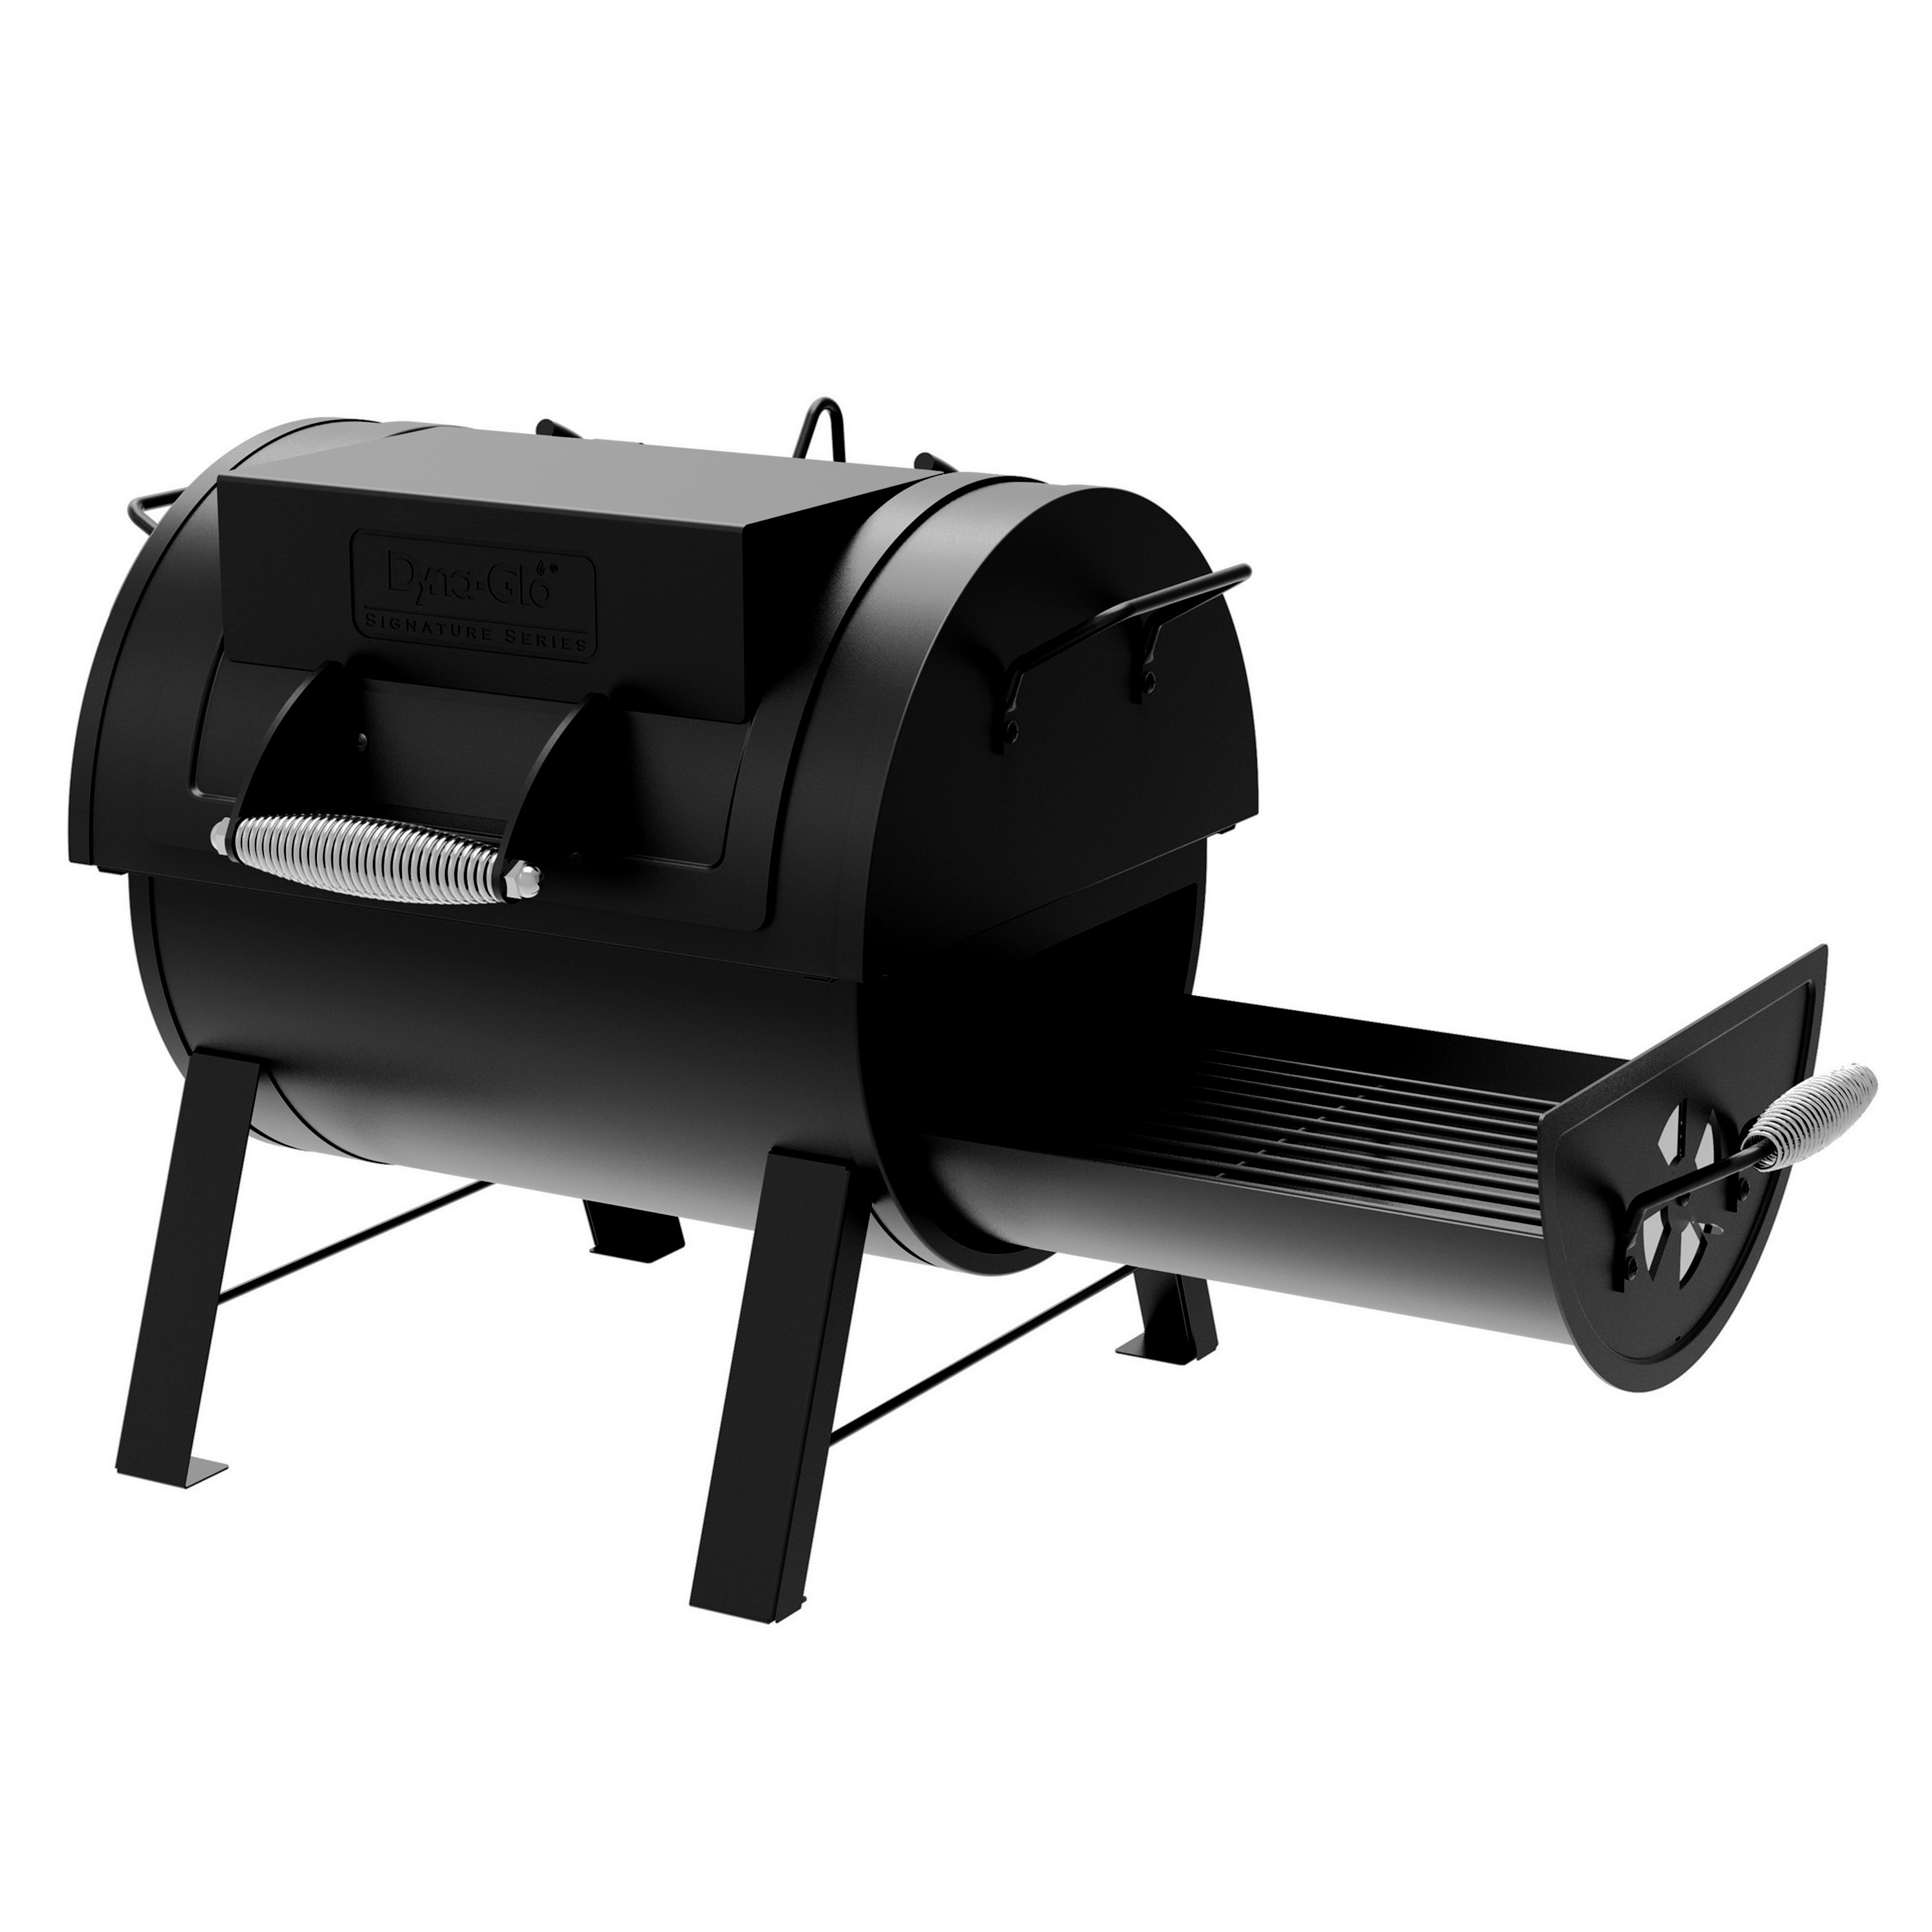 Dyna-Glo Portable Tabletop Charcoal Grill & Side Firebox - image 4 of 11